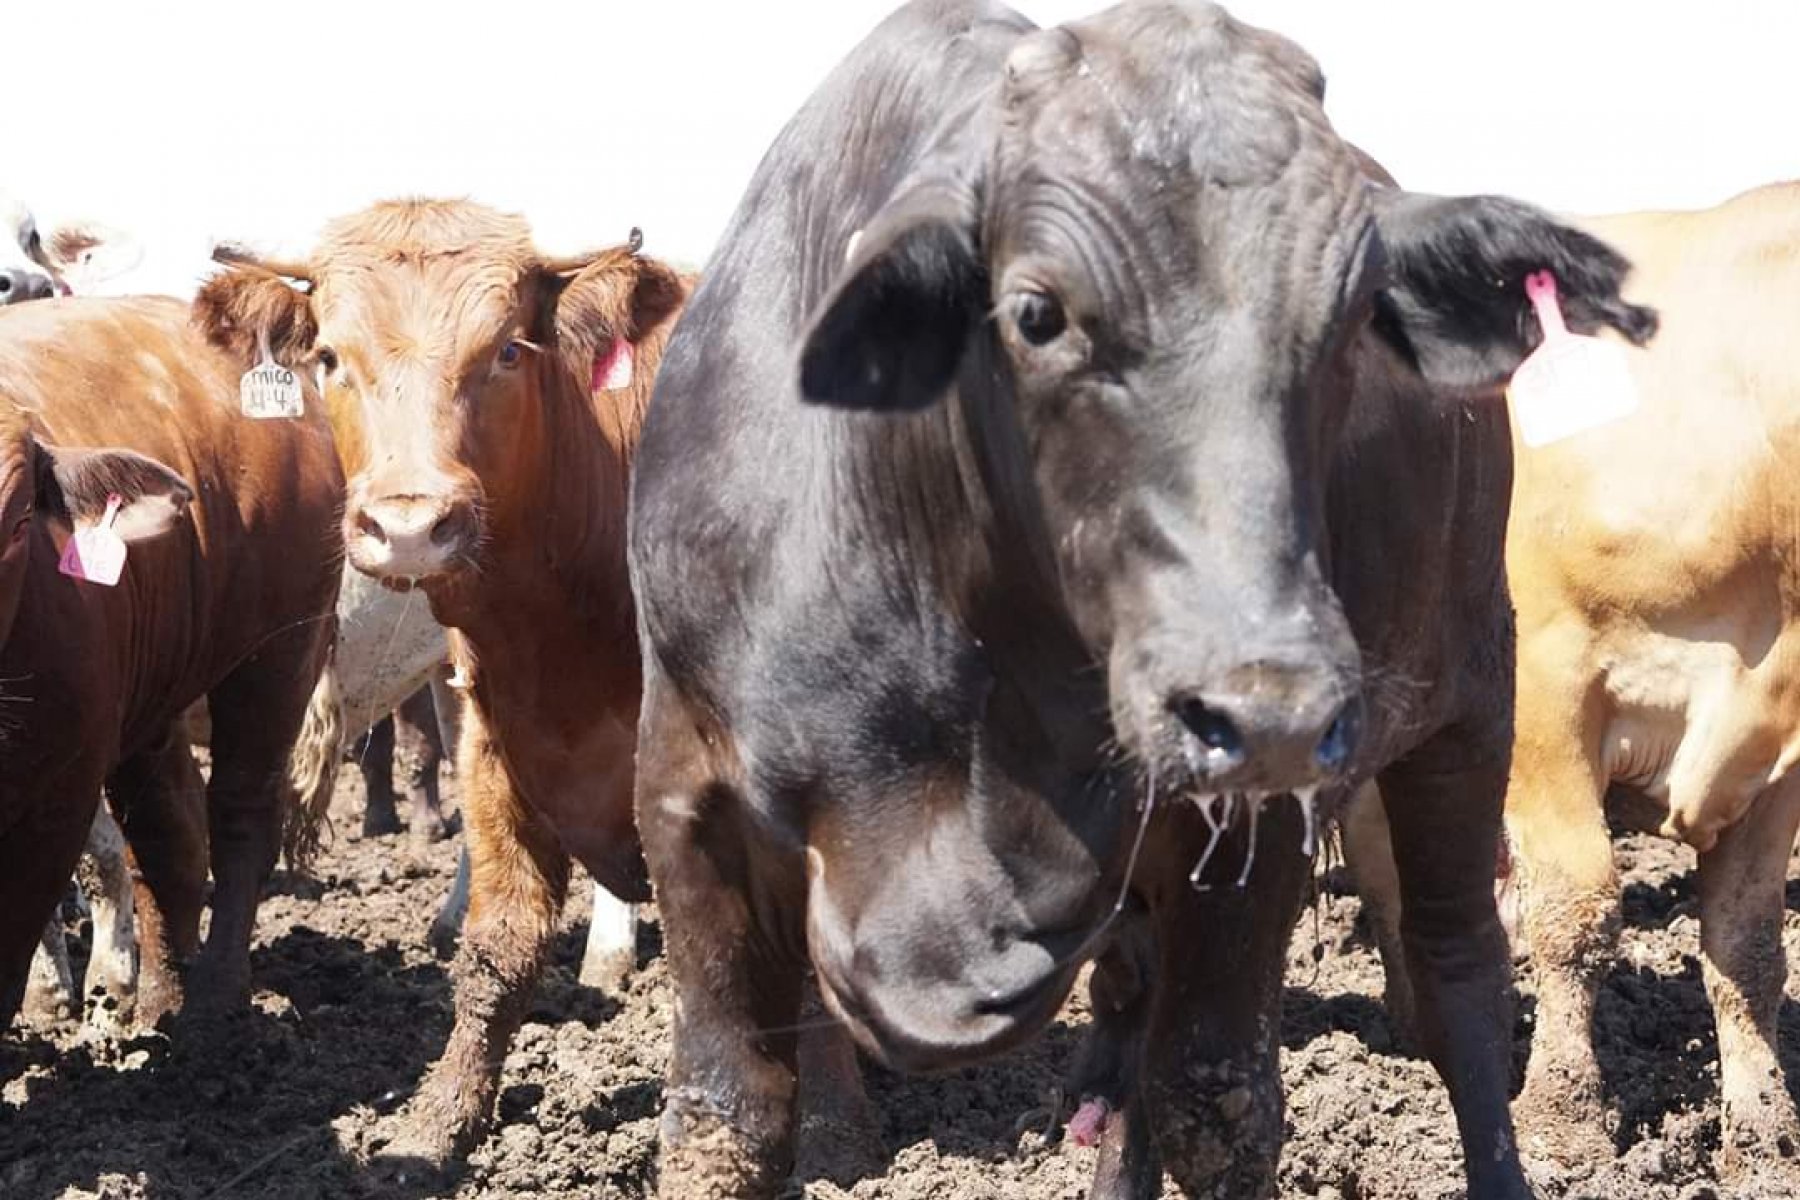 Great News! Victorian Feedlot Proposal Withdrawn Following Objections!